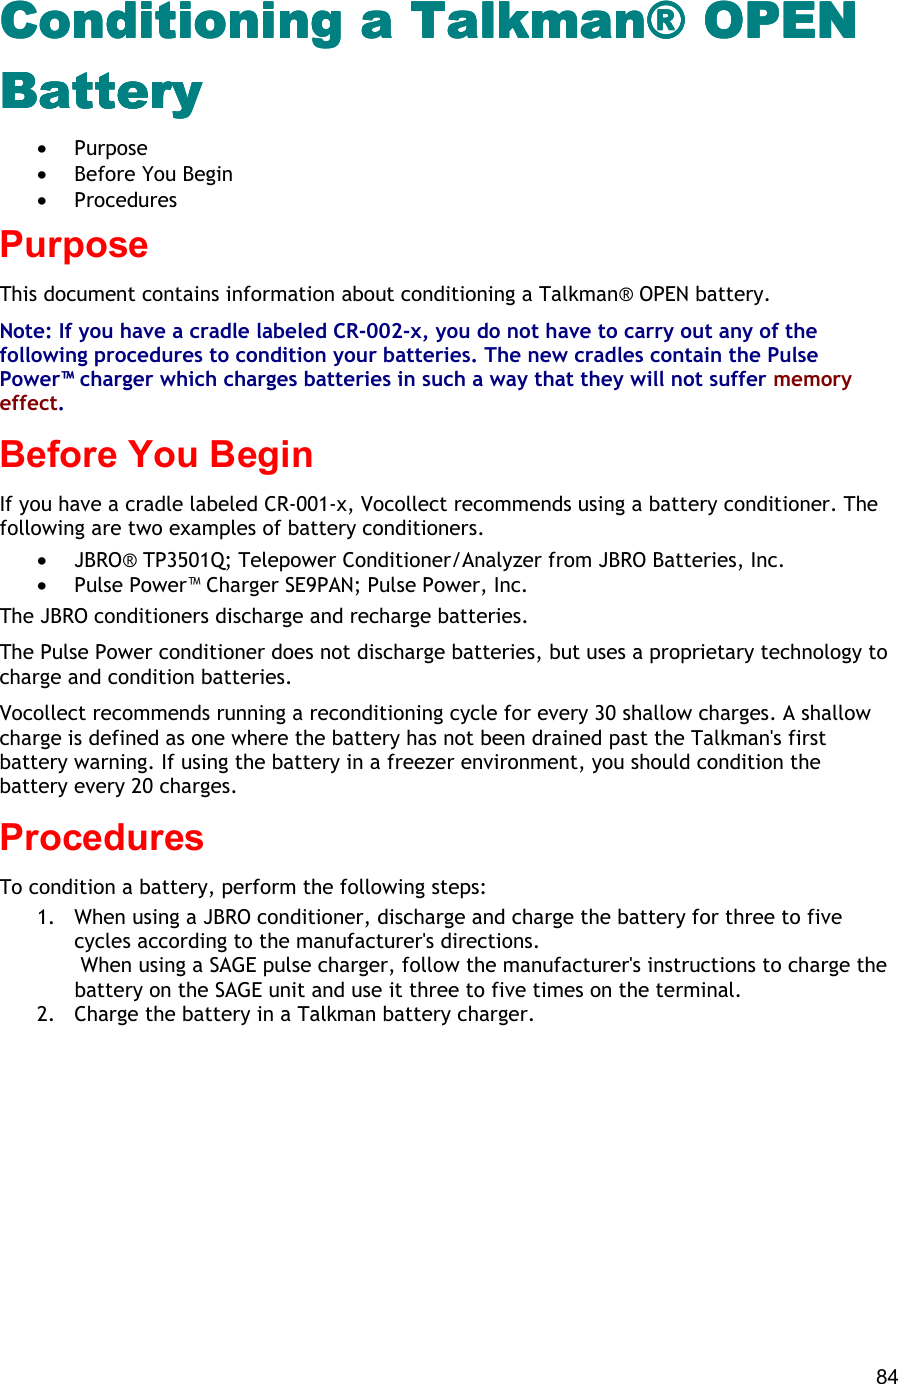  84 Conditioning a Talkman® OPEN Conditioning a Talkman® OPEN Conditioning a Talkman® OPEN Conditioning a Talkman® OPEN BatteryBatteryBatteryBattery •  Purpose •  Before You Begin •  Procedures Purpose This document contains information about conditioning a Talkman® OPEN battery. Note: If you have a cradle labeled CR-002-x, you do not have to carry out any of the following procedures to condition your batteries. The new cradles contain the Pulse Power™ charger which charges batteries in such a way that they will not suffer memory effect. Before You Begin If you have a cradle labeled CR-001-x, Vocollect recommends using a battery conditioner. The following are two examples of battery conditioners. •  JBRO® TP3501Q; Telepower Conditioner/Analyzer from JBRO Batteries, Inc. •  Pulse Power™ Charger SE9PAN; Pulse Power, Inc. The JBRO conditioners discharge and recharge batteries.  The Pulse Power conditioner does not discharge batteries, but uses a proprietary technology to charge and condition batteries. Vocollect recommends running a reconditioning cycle for every 30 shallow charges. A shallow charge is defined as one where the battery has not been drained past the Talkman&apos;s first battery warning. If using the battery in a freezer environment, you should condition the battery every 20 charges. Procedures To condition a battery, perform the following steps: 1.  When using a JBRO conditioner, discharge and charge the battery for three to five cycles according to the manufacturer&apos;s directions.  When using a SAGE pulse charger, follow the manufacturer&apos;s instructions to charge the battery on the SAGE unit and use it three to five times on the terminal.  2.  Charge the battery in a Talkman battery charger.      